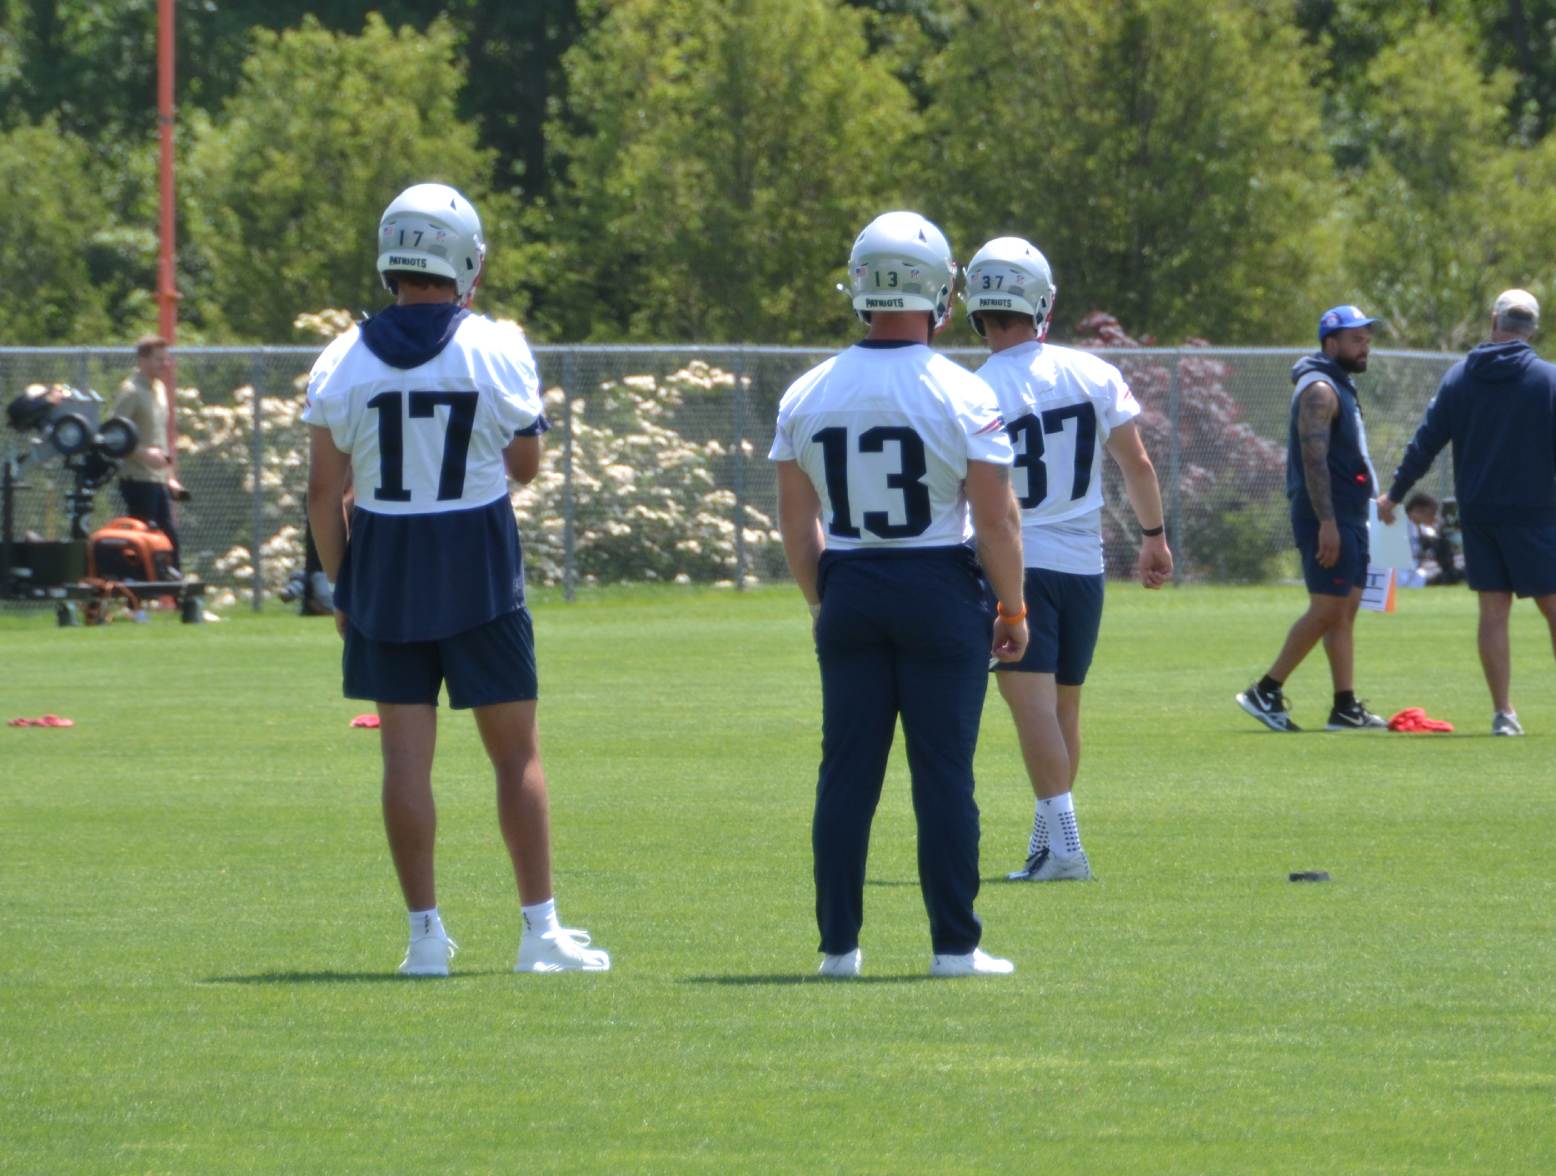 Patriots kickers Chad Ryland (37) and Joey Sly (13) and punter Bryce Baringer (17) work on kickoffs during Patriots OTA practice. (Alex Barth/98.5 The Sports Hub)